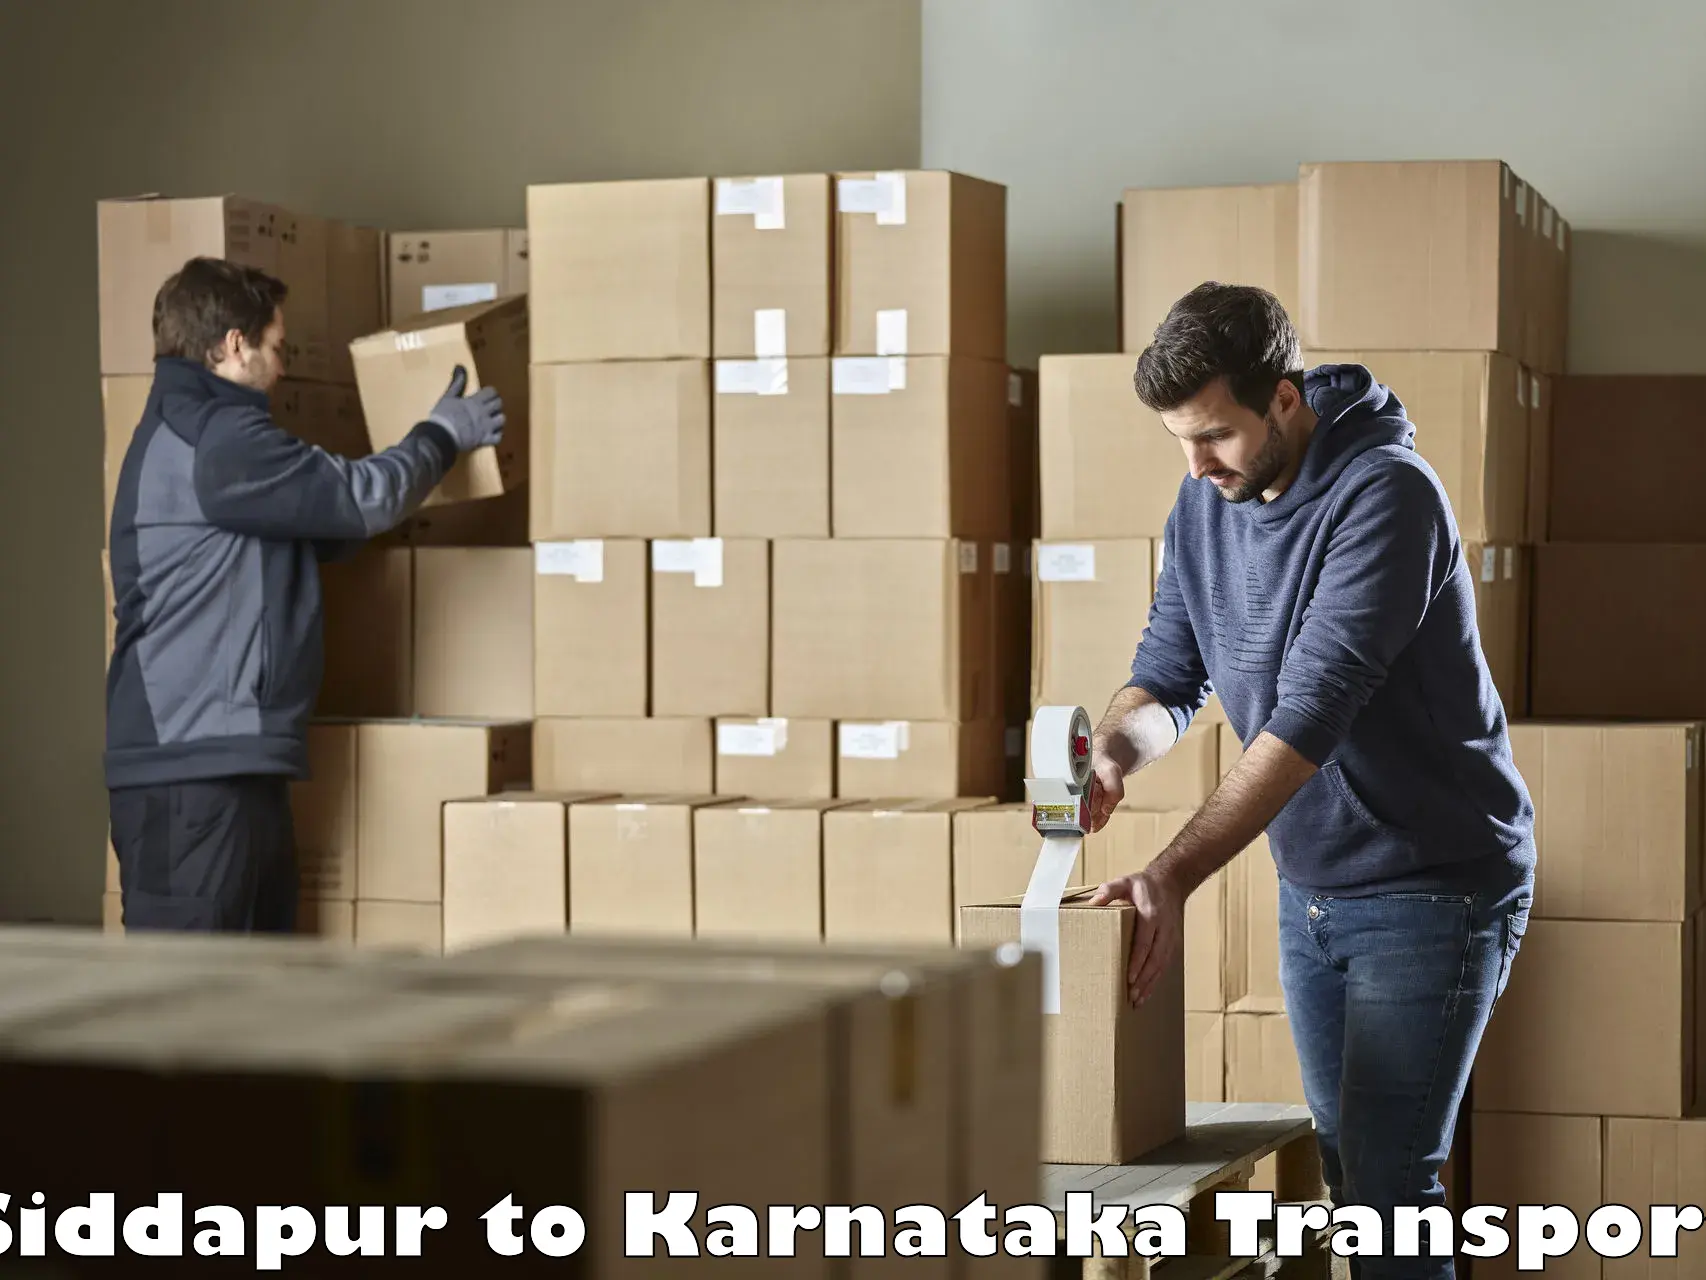 Container transport service Siddapur to Kittur